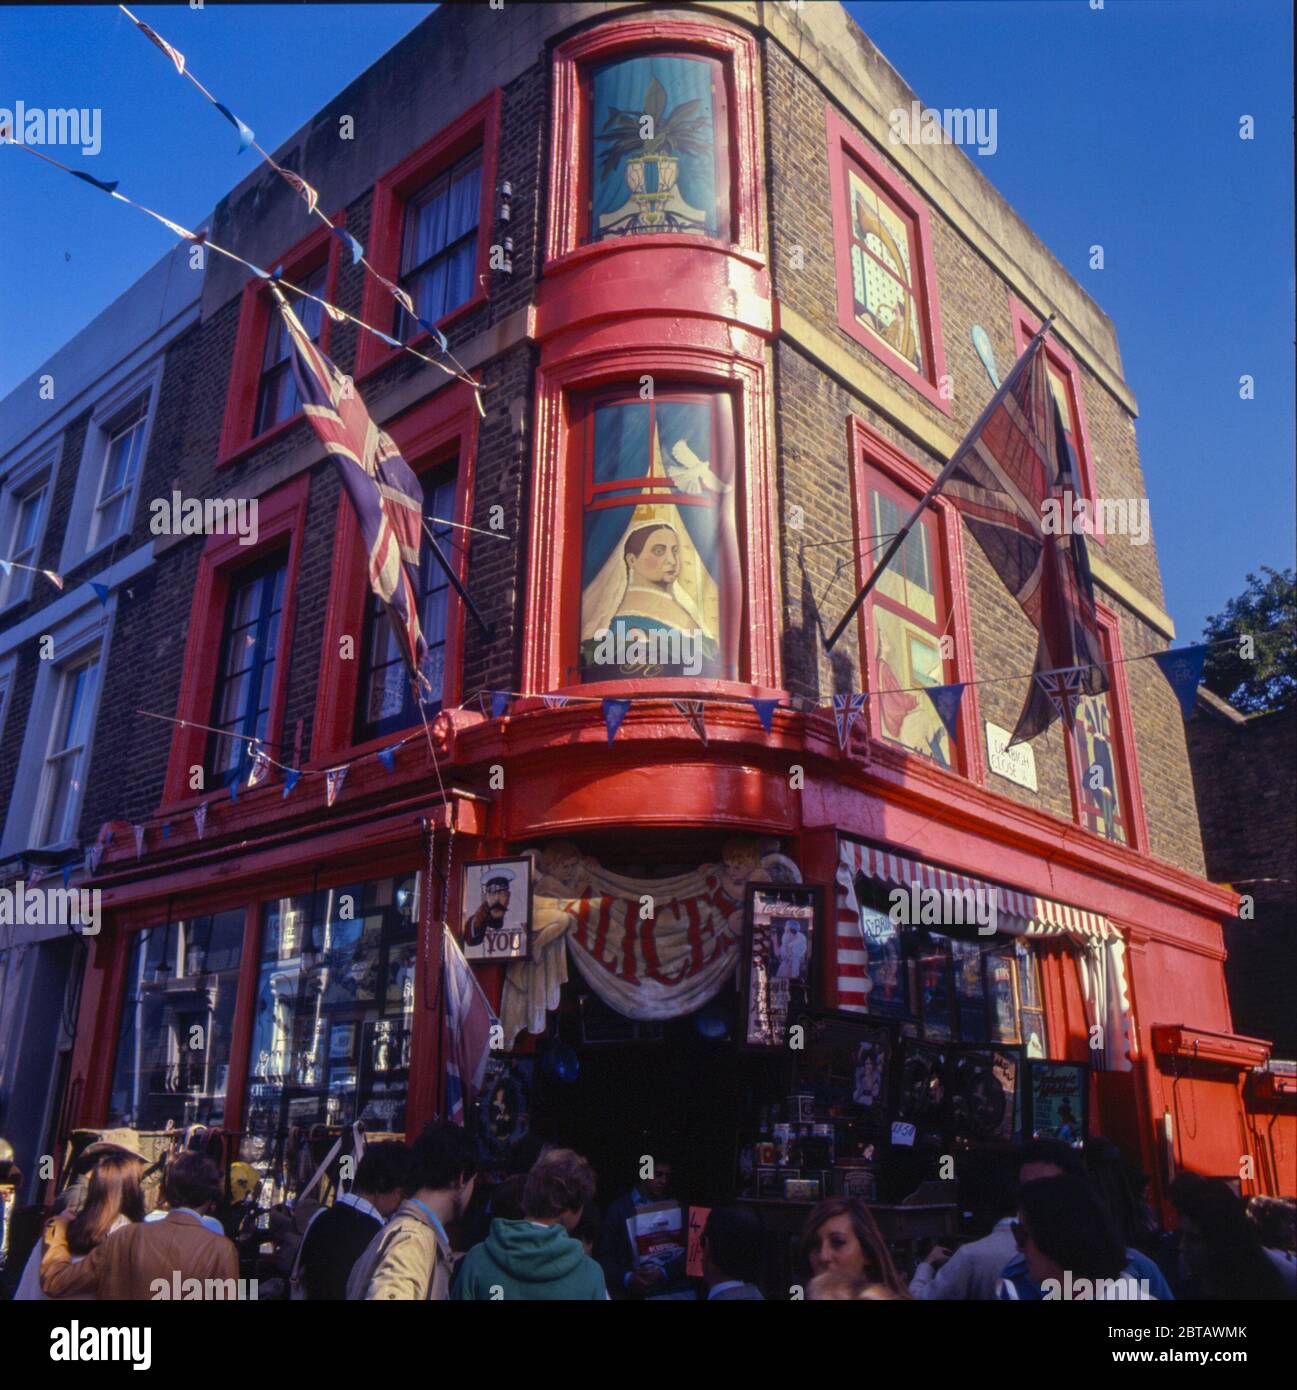 The world famous Alice's antique shop at 86 Portobello Road, Notting Hill in the heart of one of London's biggest antique markets Stock Photo